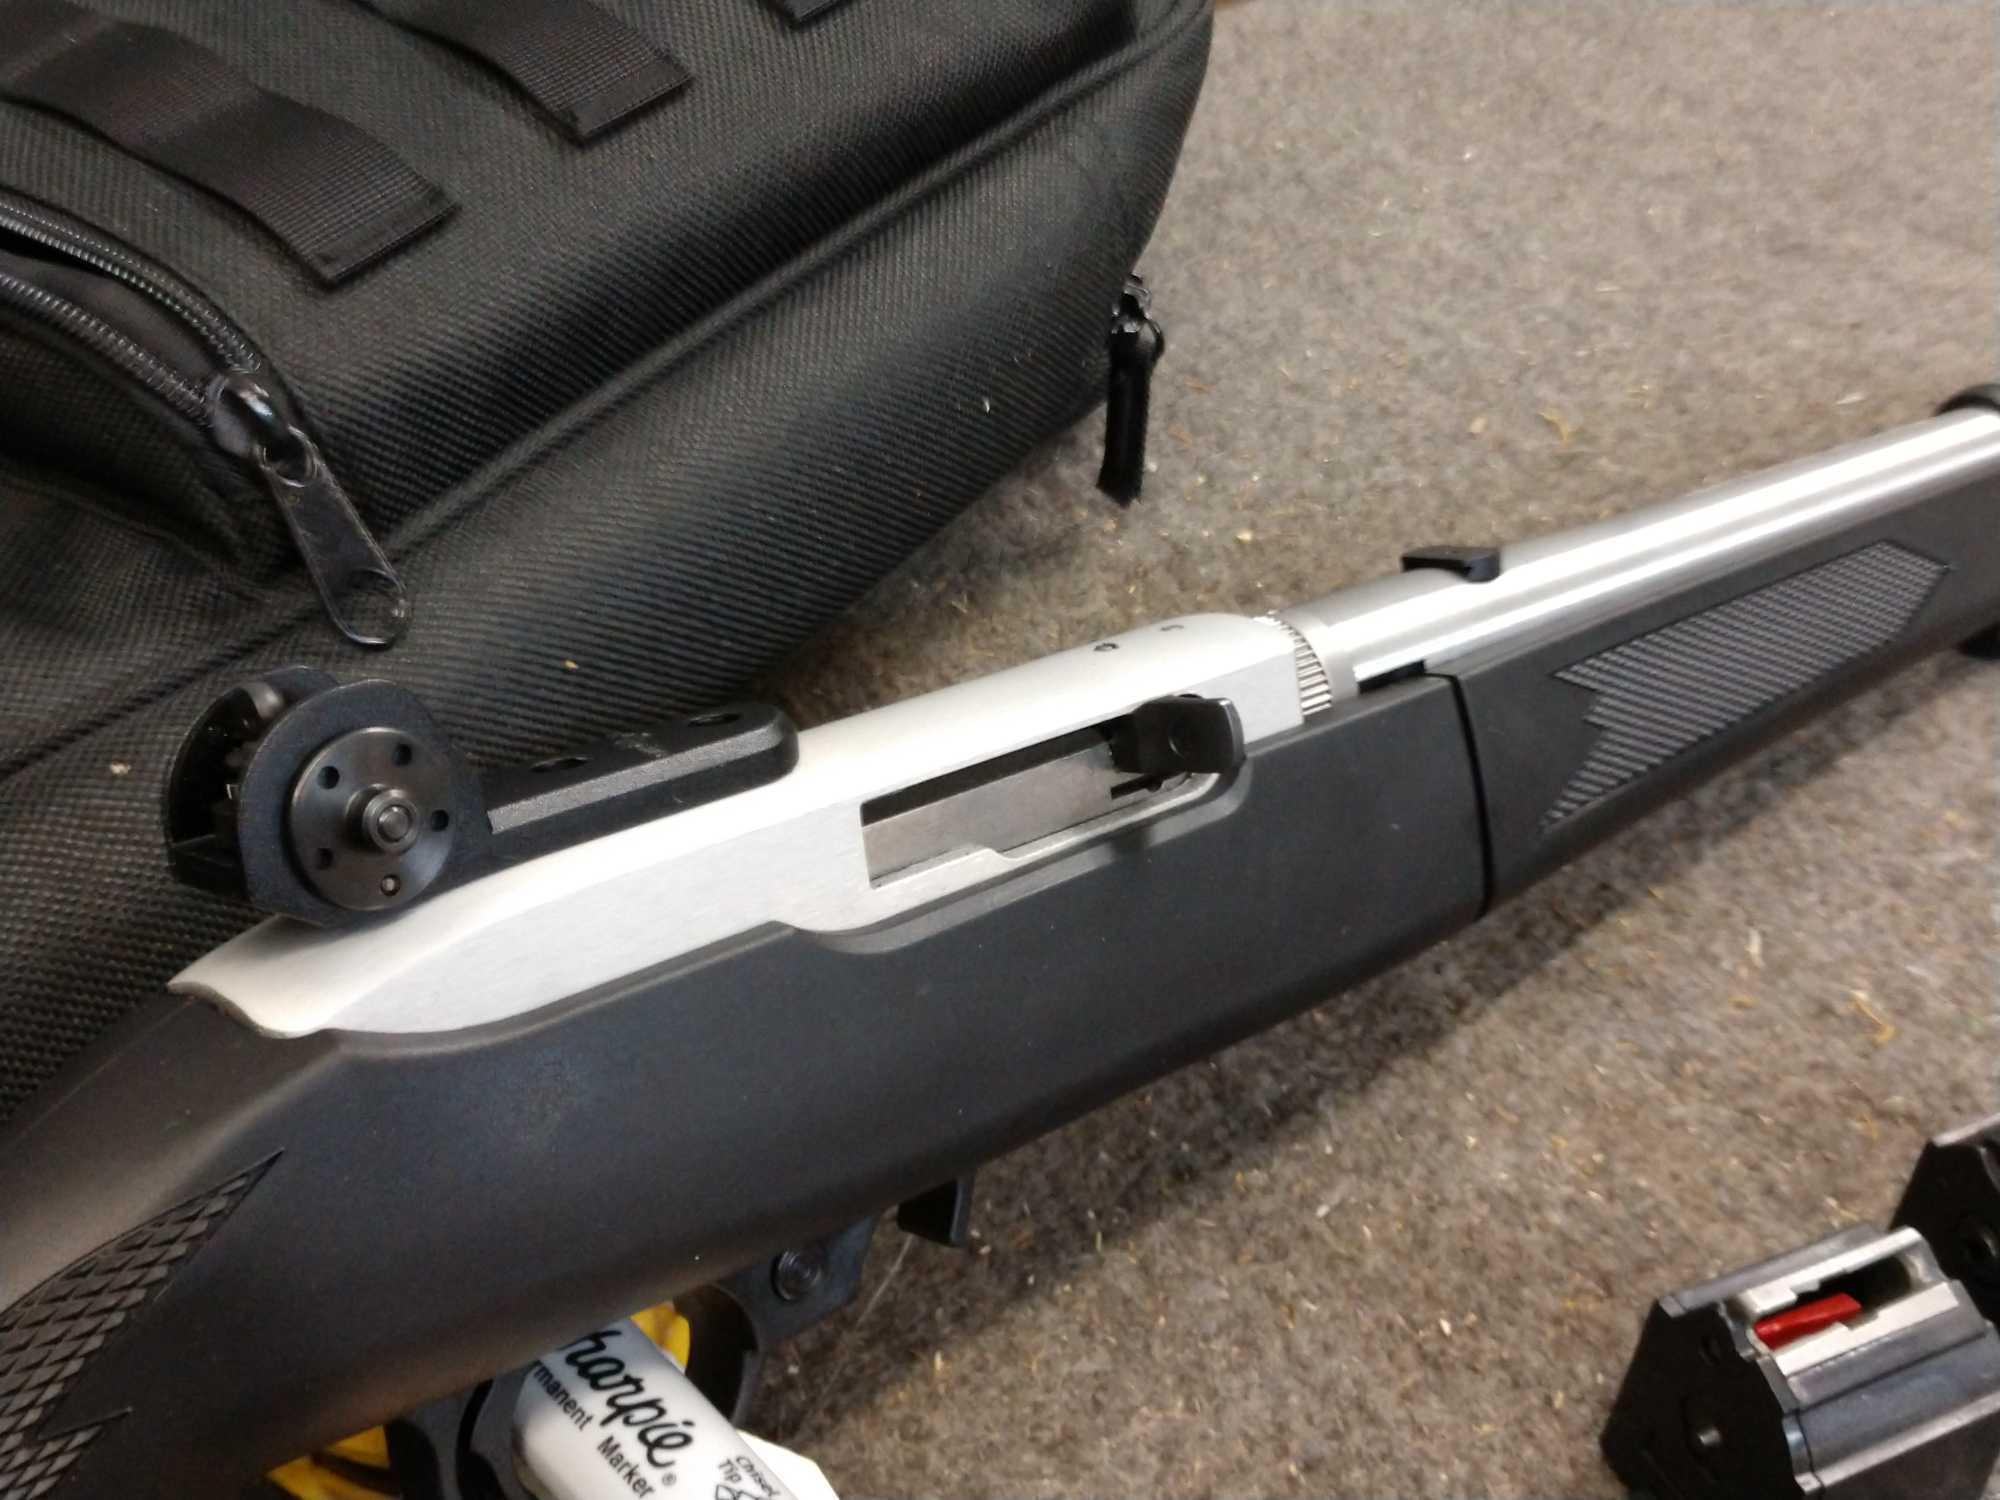 Ruger 10-22 Takedown Rifle